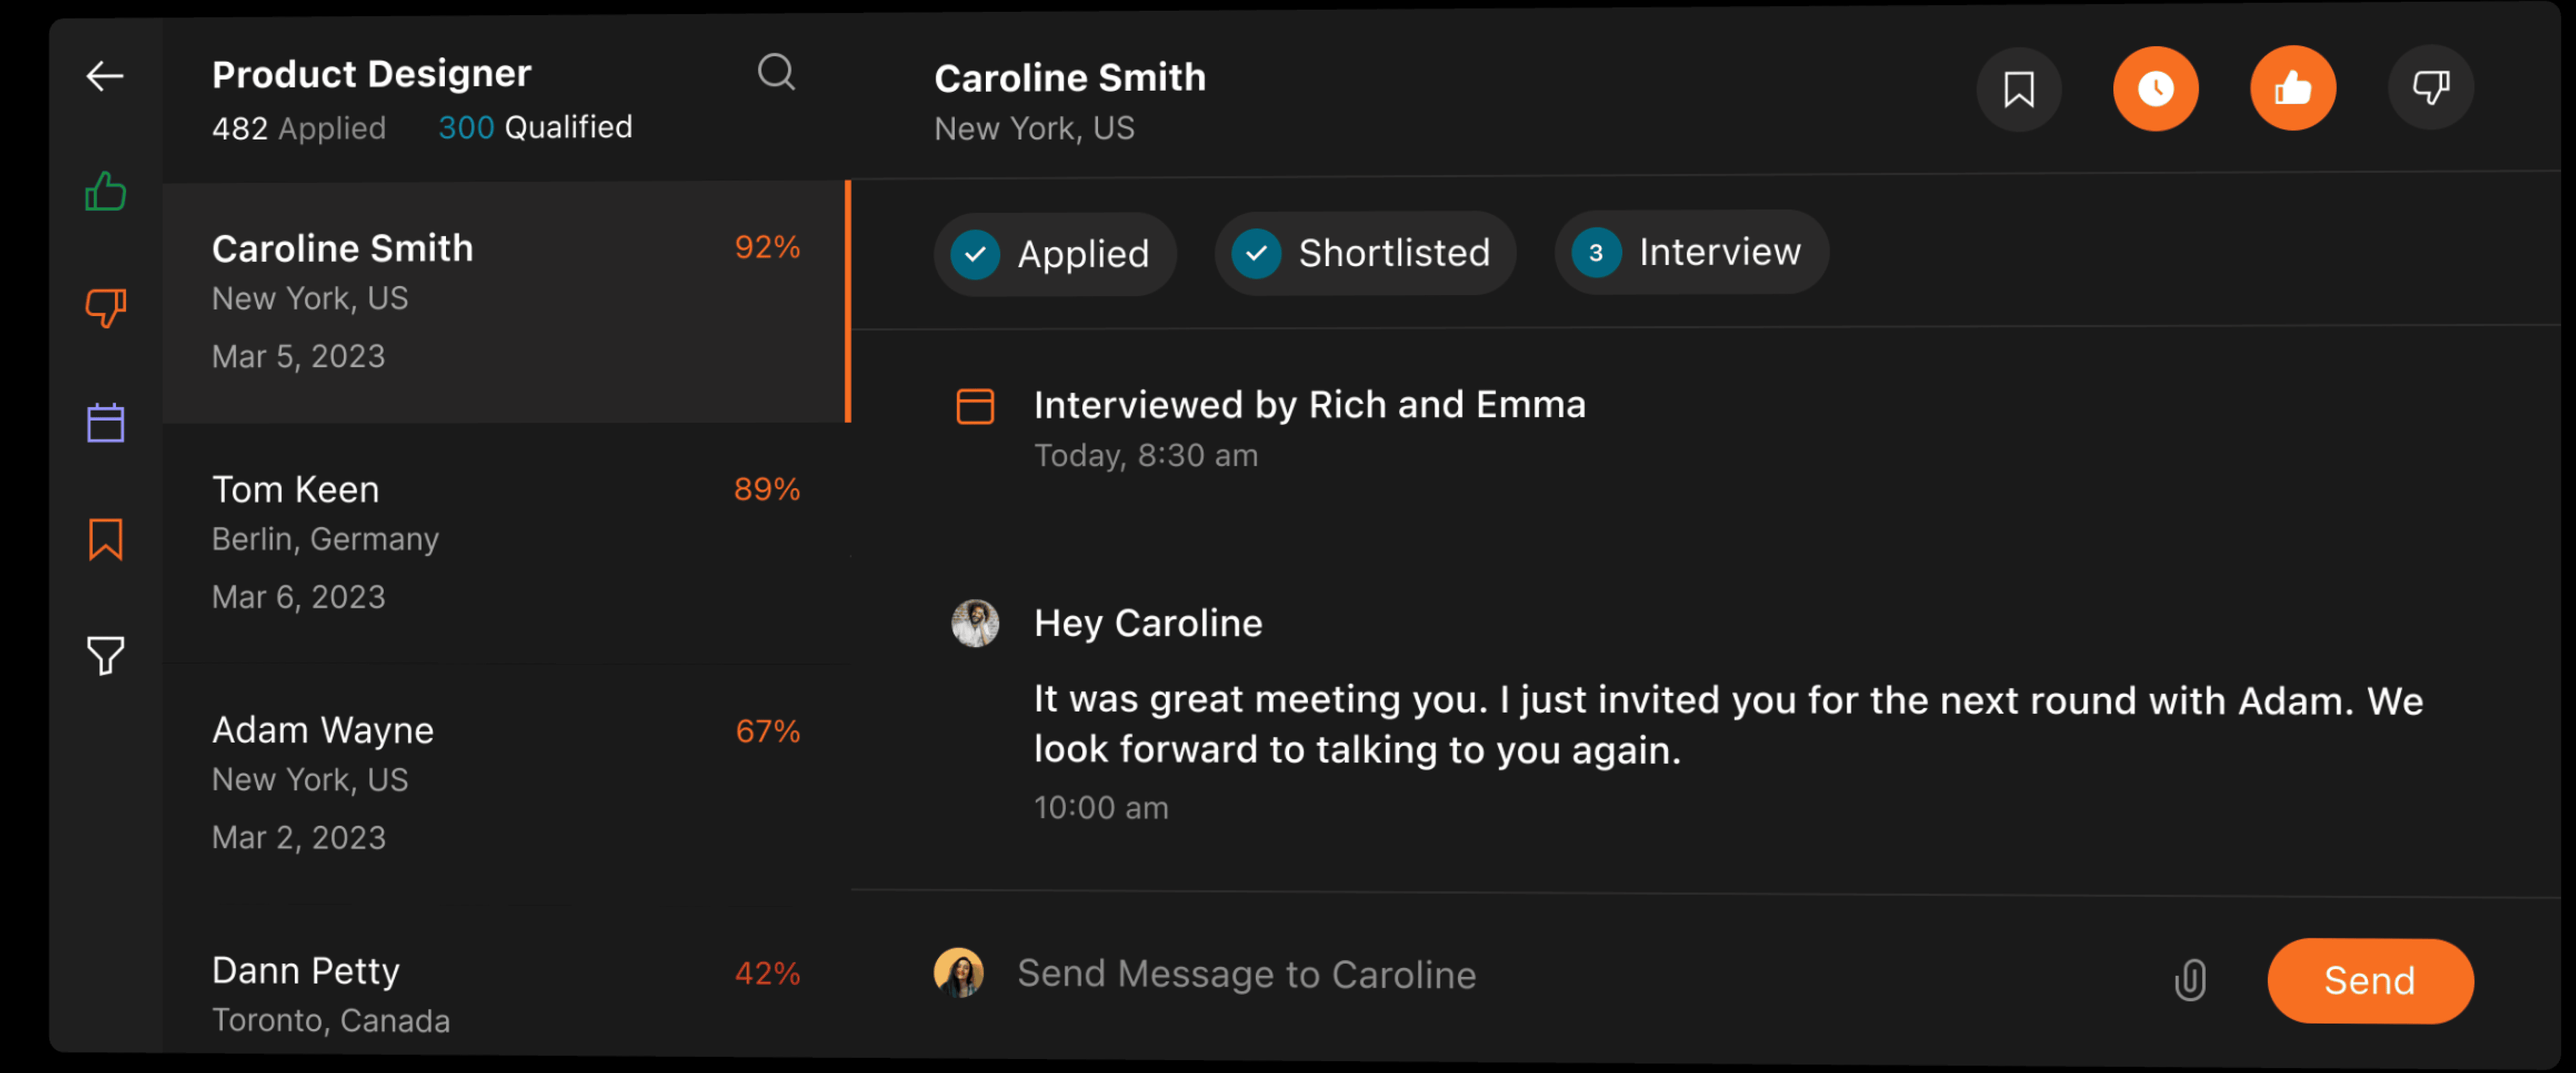 Unified candidate thread for Caroline Smith in Circle's hiring platform, detailing her high application score, communication with hiring team members, and her progress through the hiring stages, with functionality to send further messages and add notes.